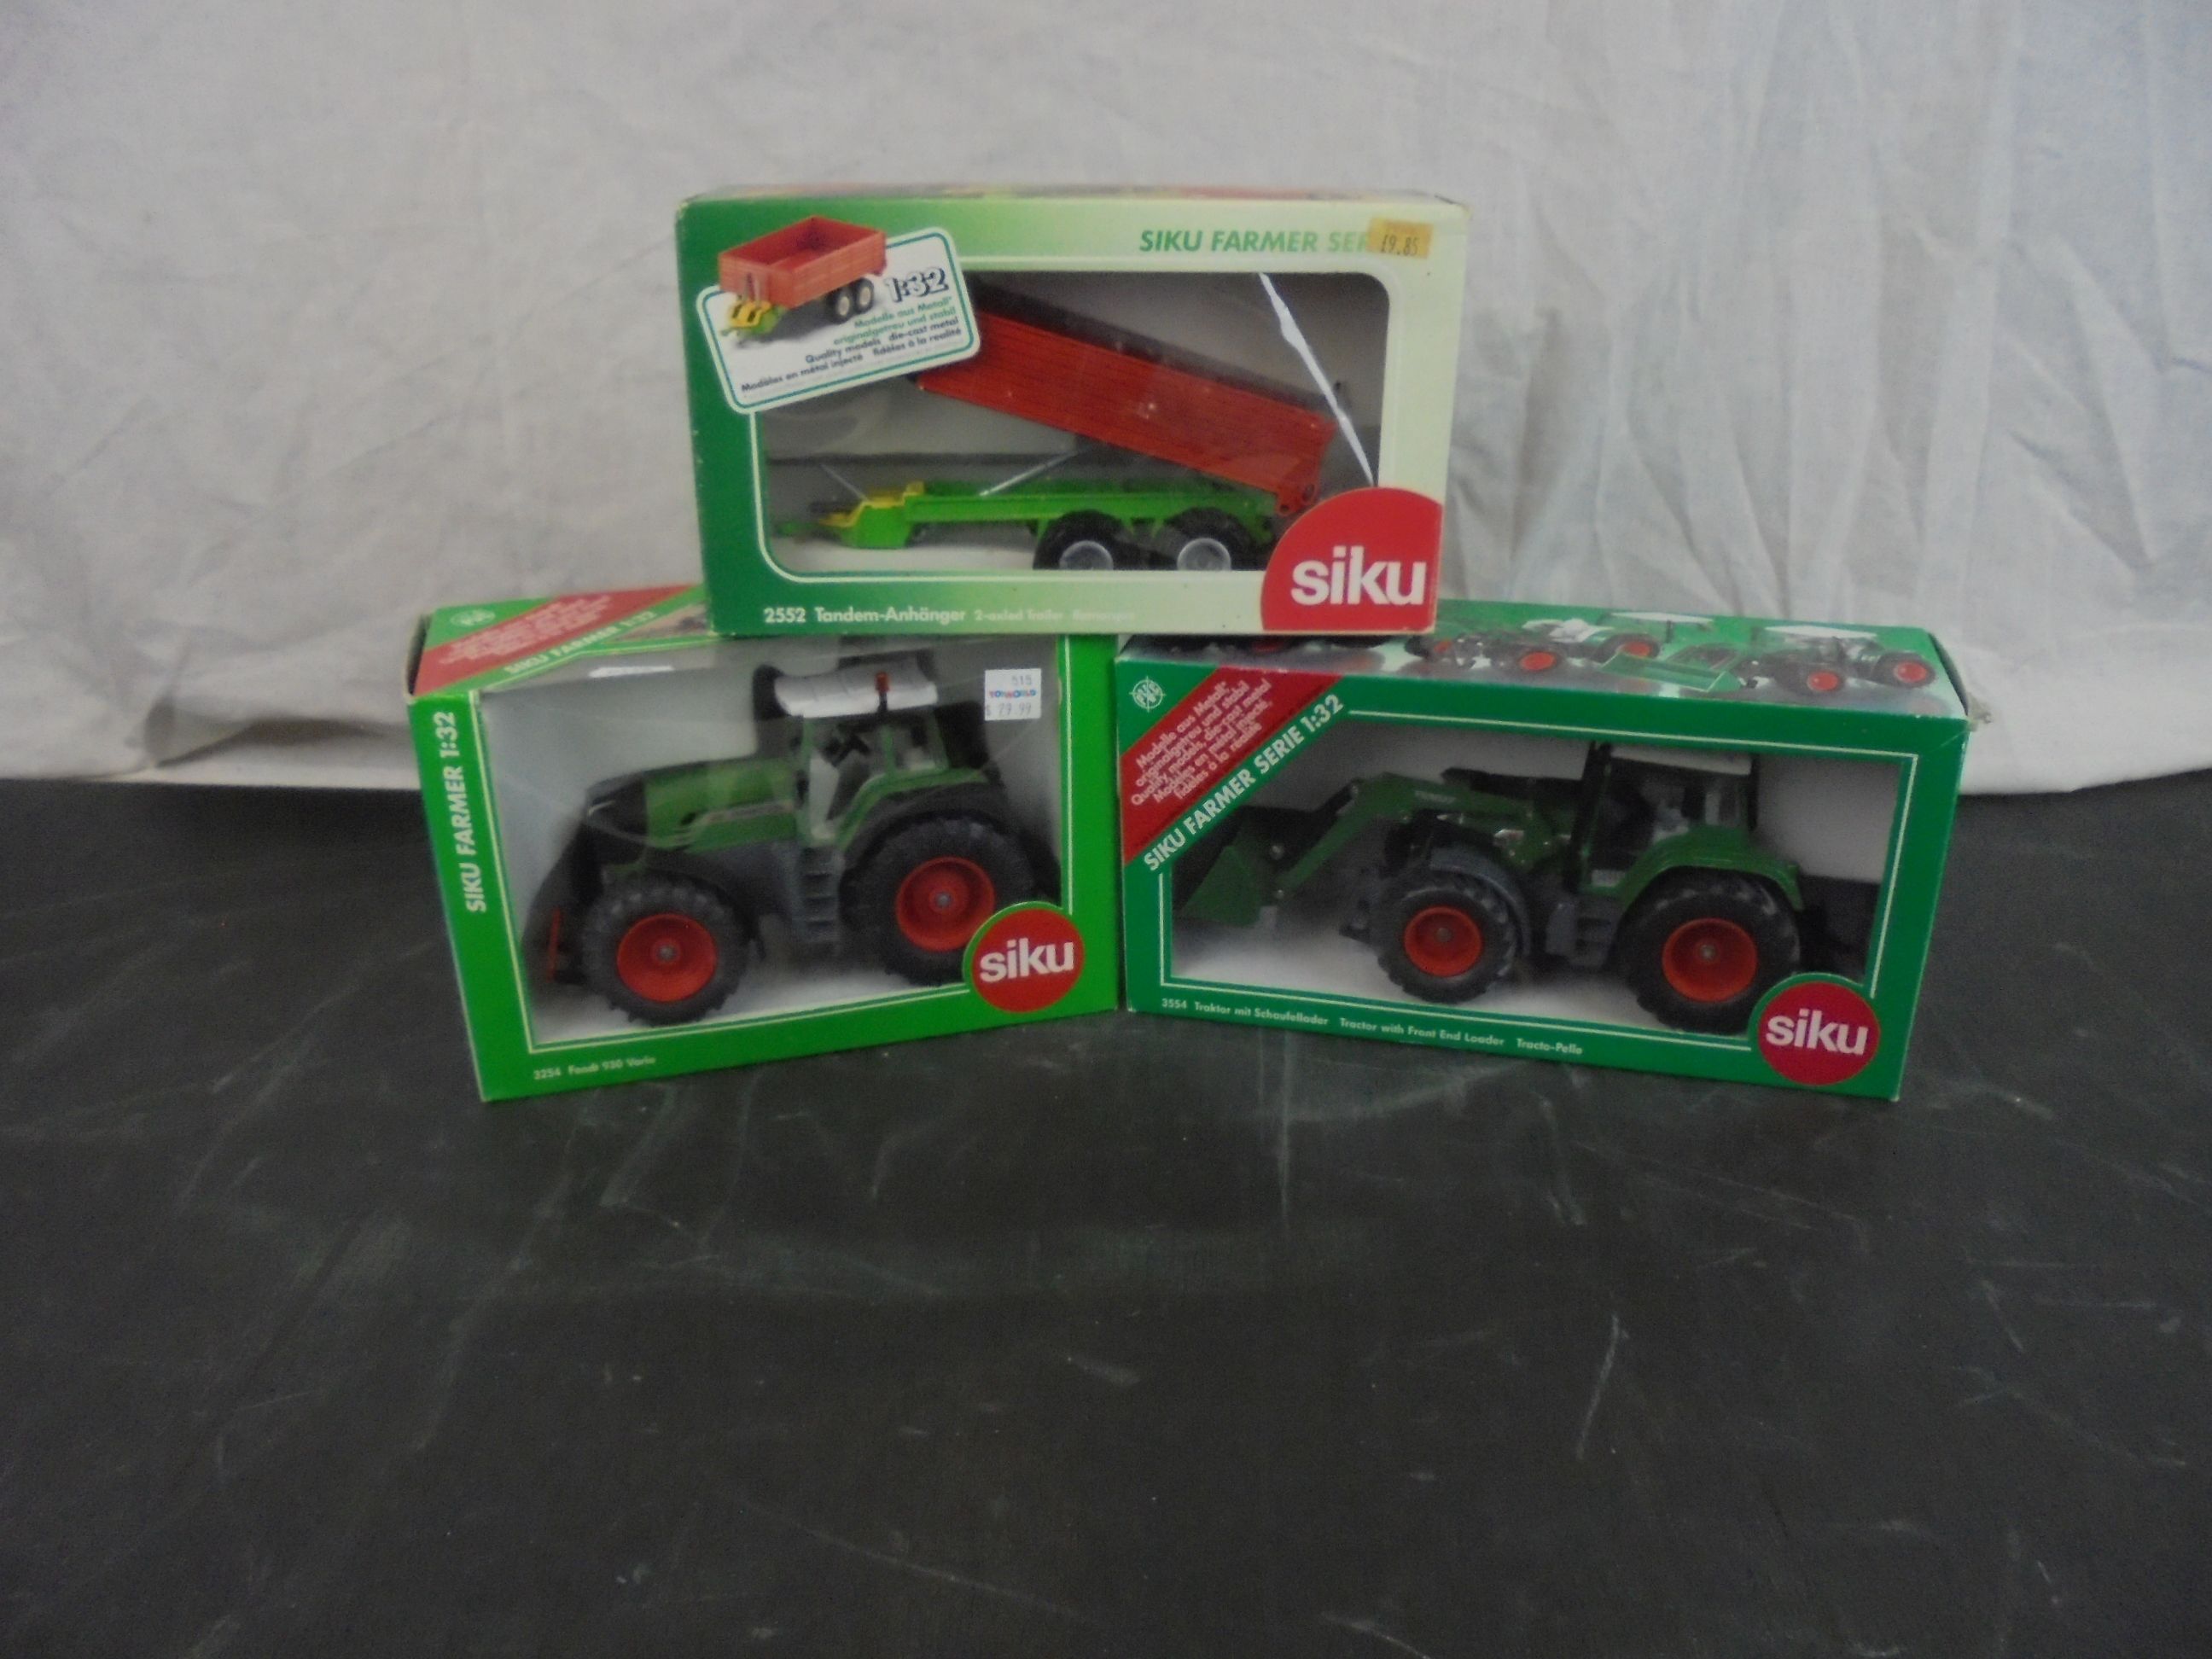 11 Boxed Siku 1/32 farming models, mainly tractors, to include 3254 x 2, 3258, 3263, 2965, 2968, - Image 3 of 5